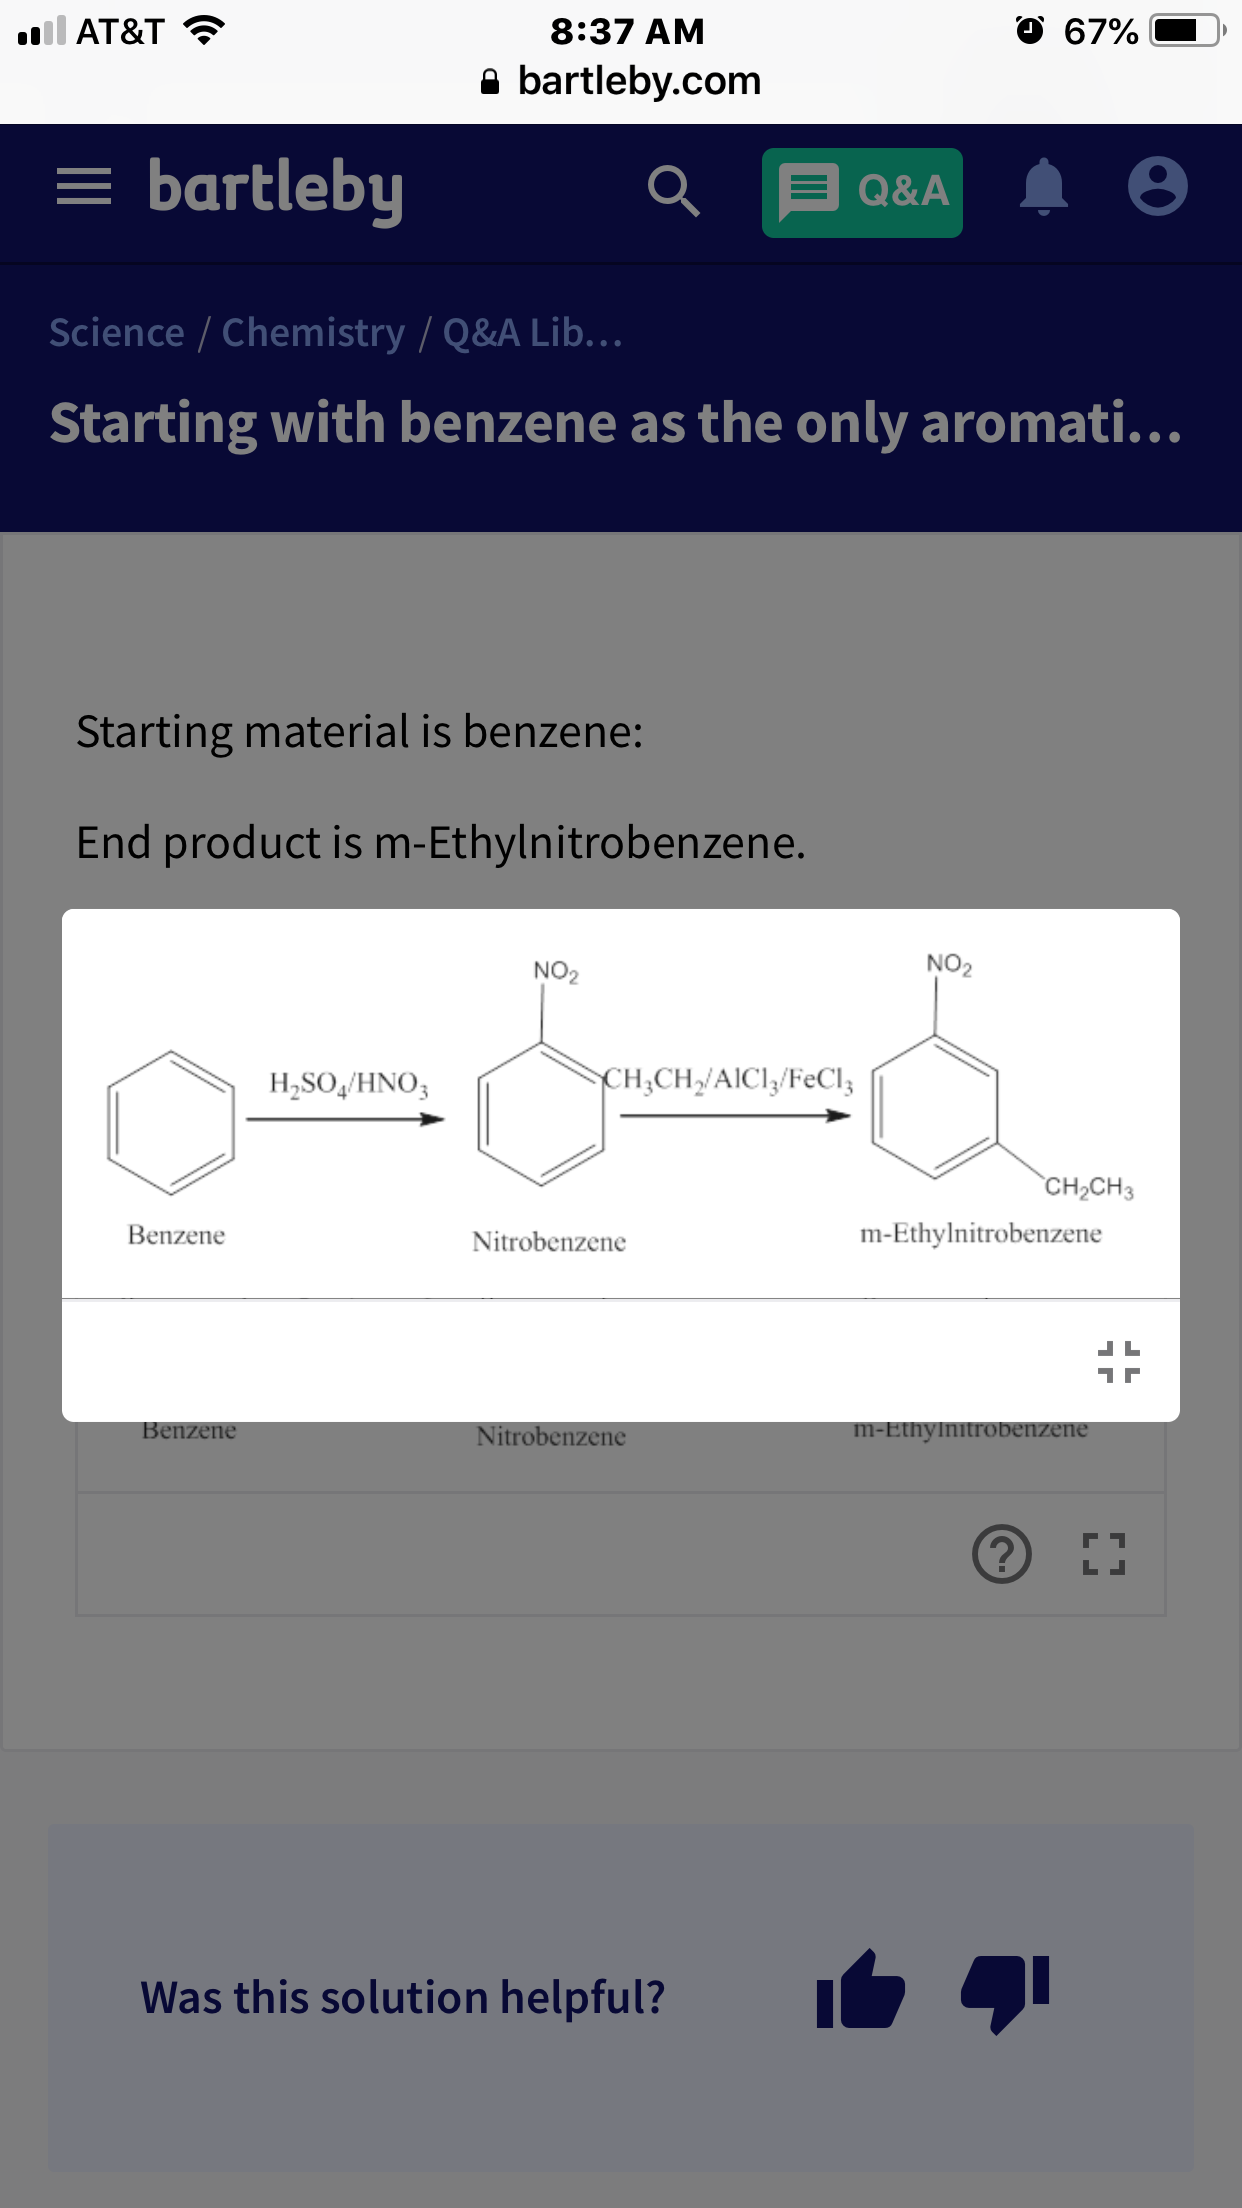 O 67%
l AT&T
8:37 AM
bartleby.com
= bartleby
Q&A
Science / Chemistry / Q&A Lib...
Starting with benzene as the only aromati...
Starting material is benzene:
End product is m-Ethylnitrobenzene.
NO2
NO2
CHCHAICI/FeCl3
H,SO,HNΟ,
CH2CH3
m-Ethylnitrobenzene
Benzene
Nitrobenzene
Benzene
m-Ethylnitrobenzene
Nitrobenzene
LI
Was this solution helpful?
